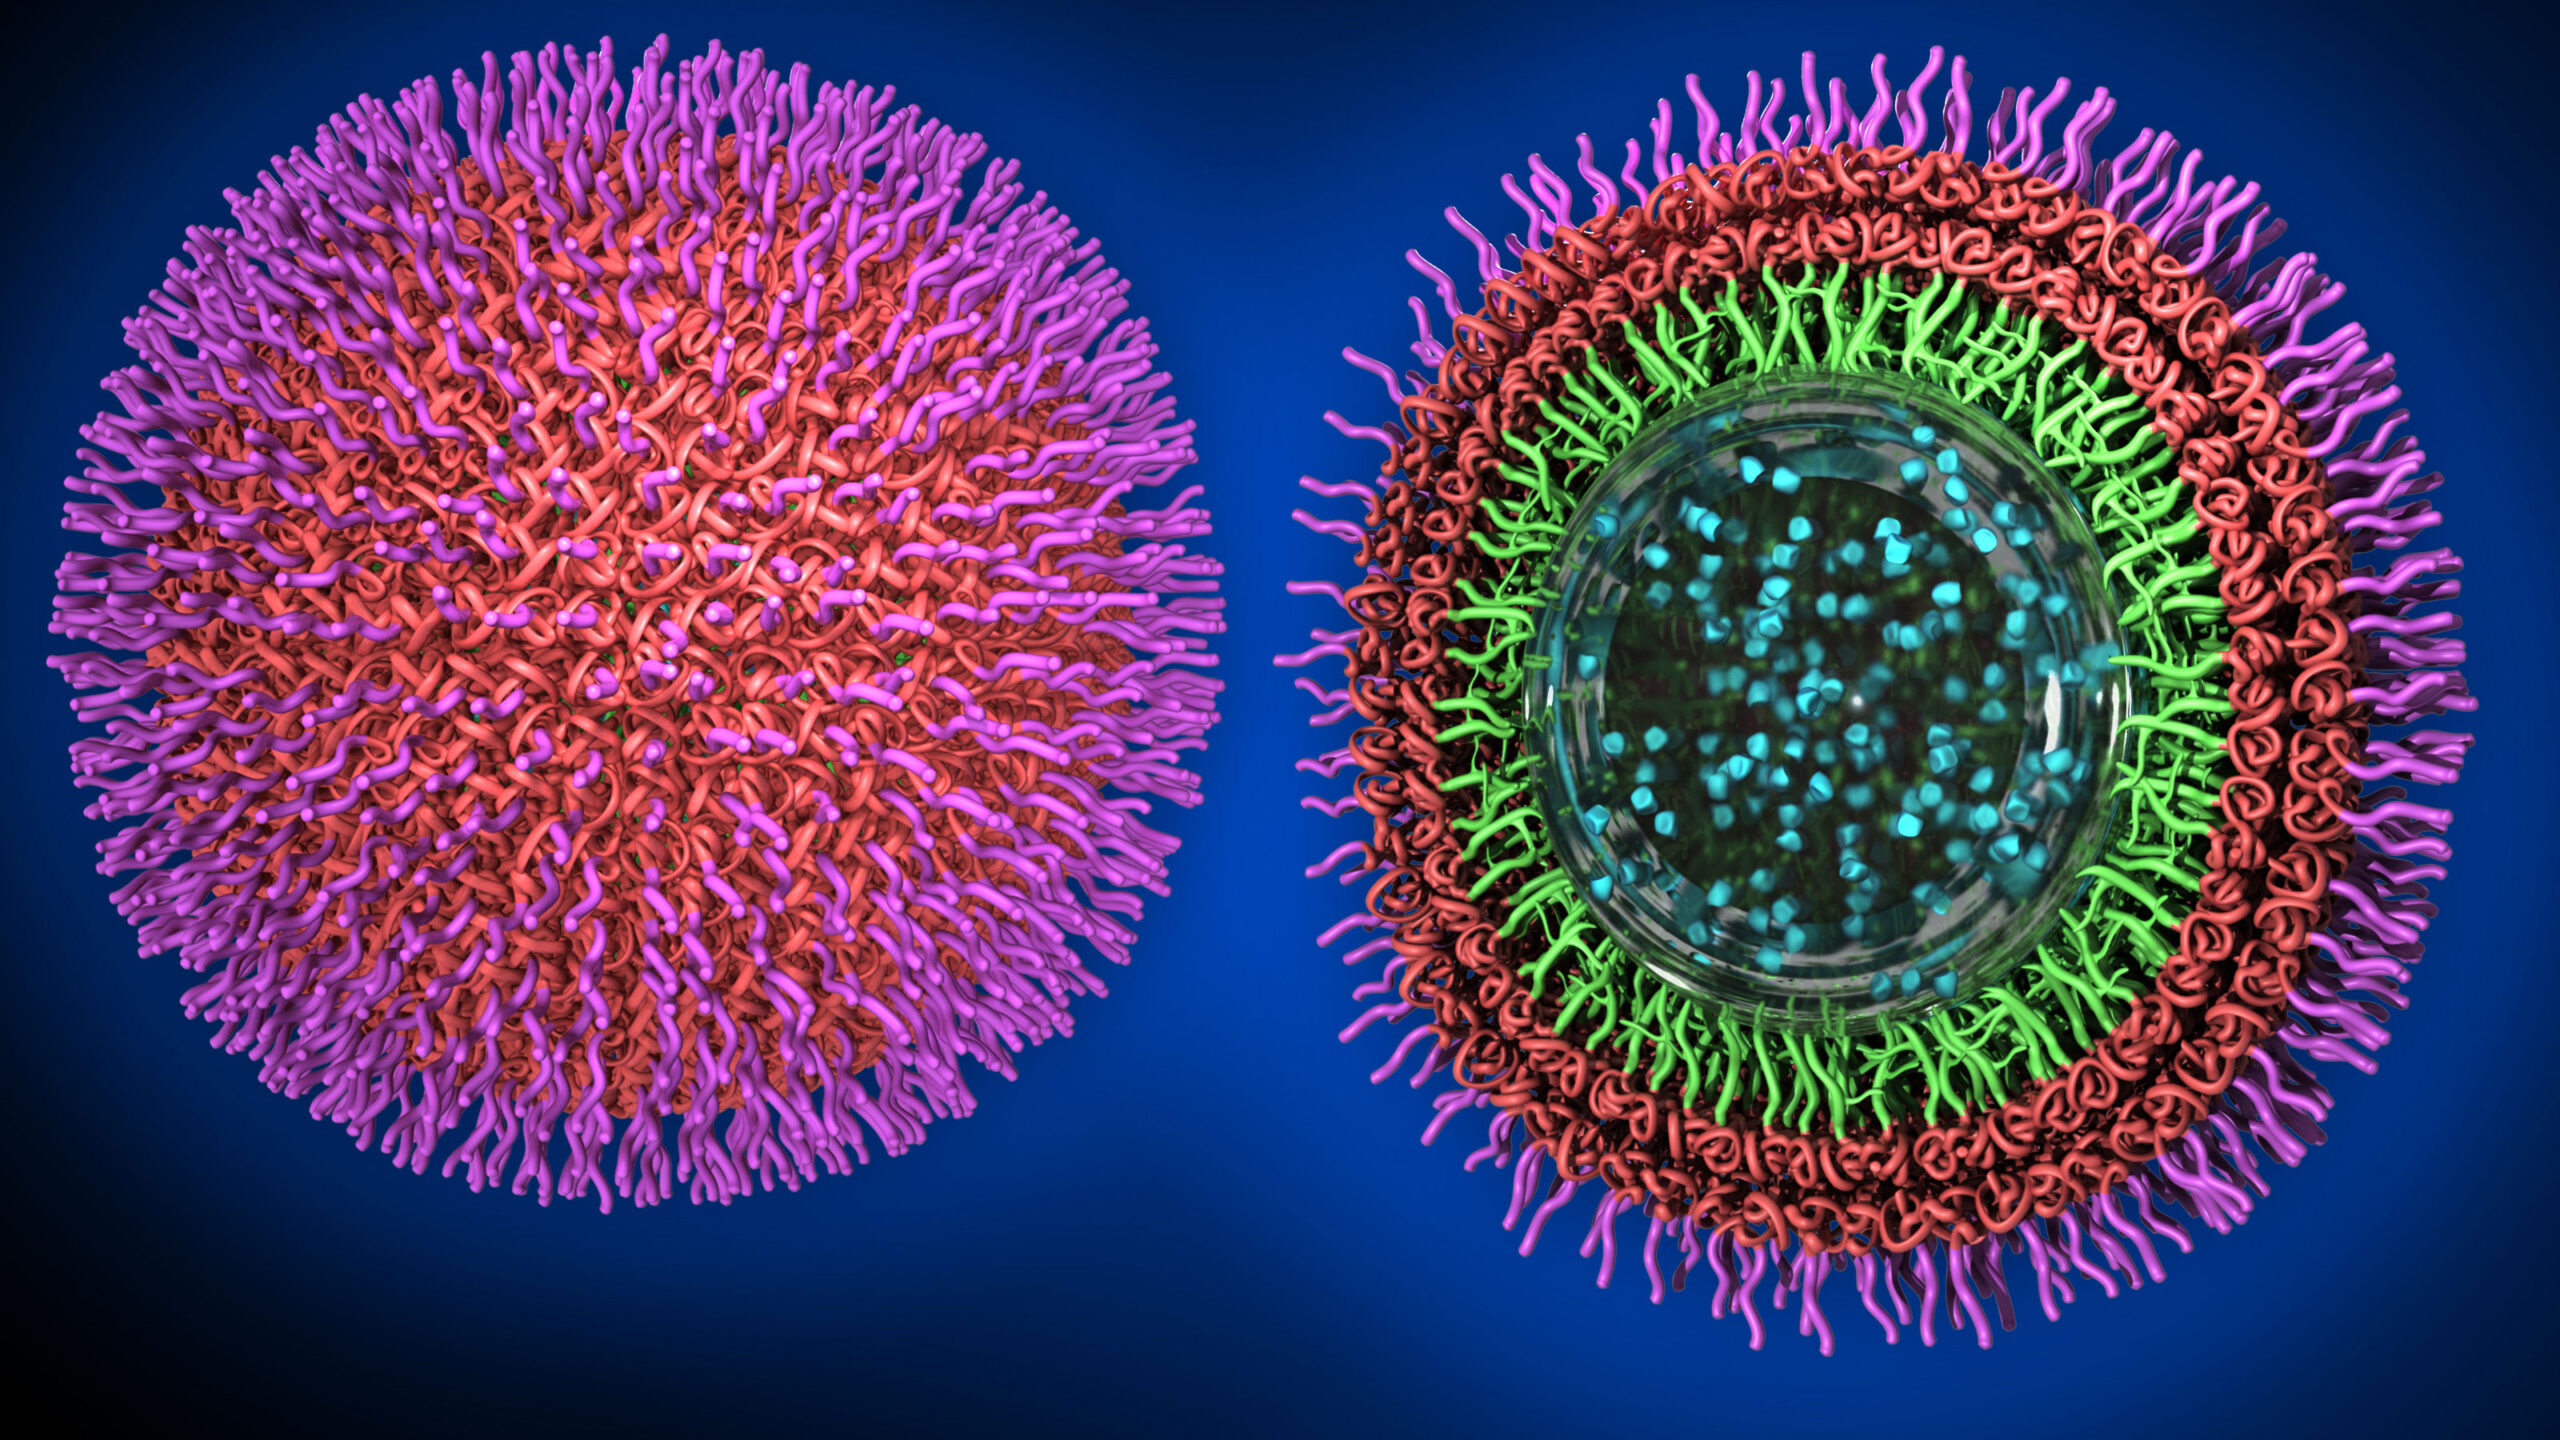 Artist's conception of nanoscale particles: at left, a sphere covered in twisted, hair-like strands; at right, a cross-section of the sphere that reveals layers of strands around an interior ball of drug particles